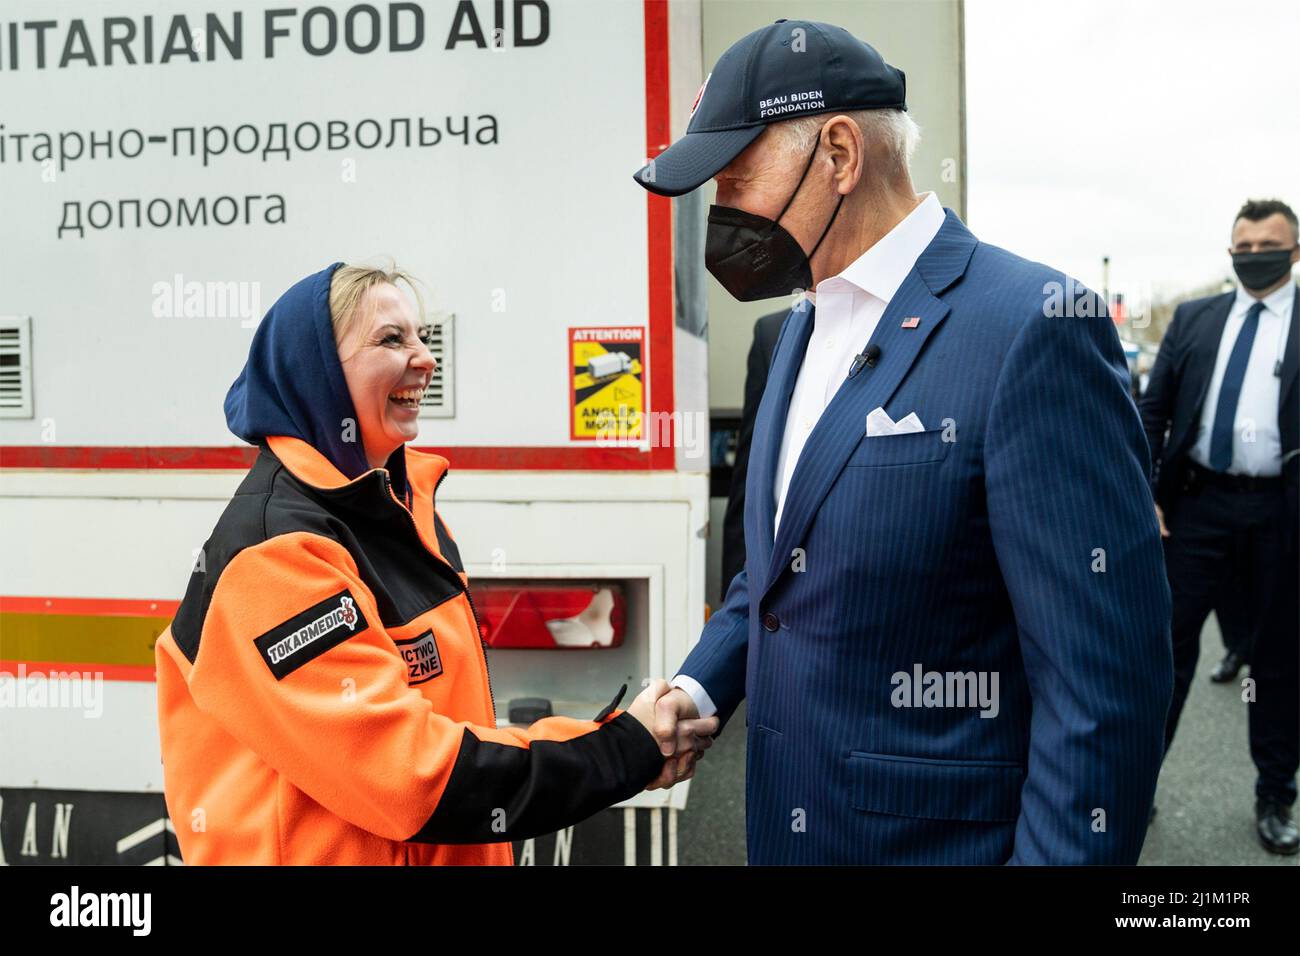 Warsaw, Poland. 26th Mar, 2022. U.S President Joe Biden greets an aid worker during a visit to Ukrainian refugees fleeing the Russian invasion at PGE Narodowy Stadium, March 26, 2022 in Warsaw, Poland. Credit: Adam Schultz/White House Photo/Alamy Live News Stock Photo